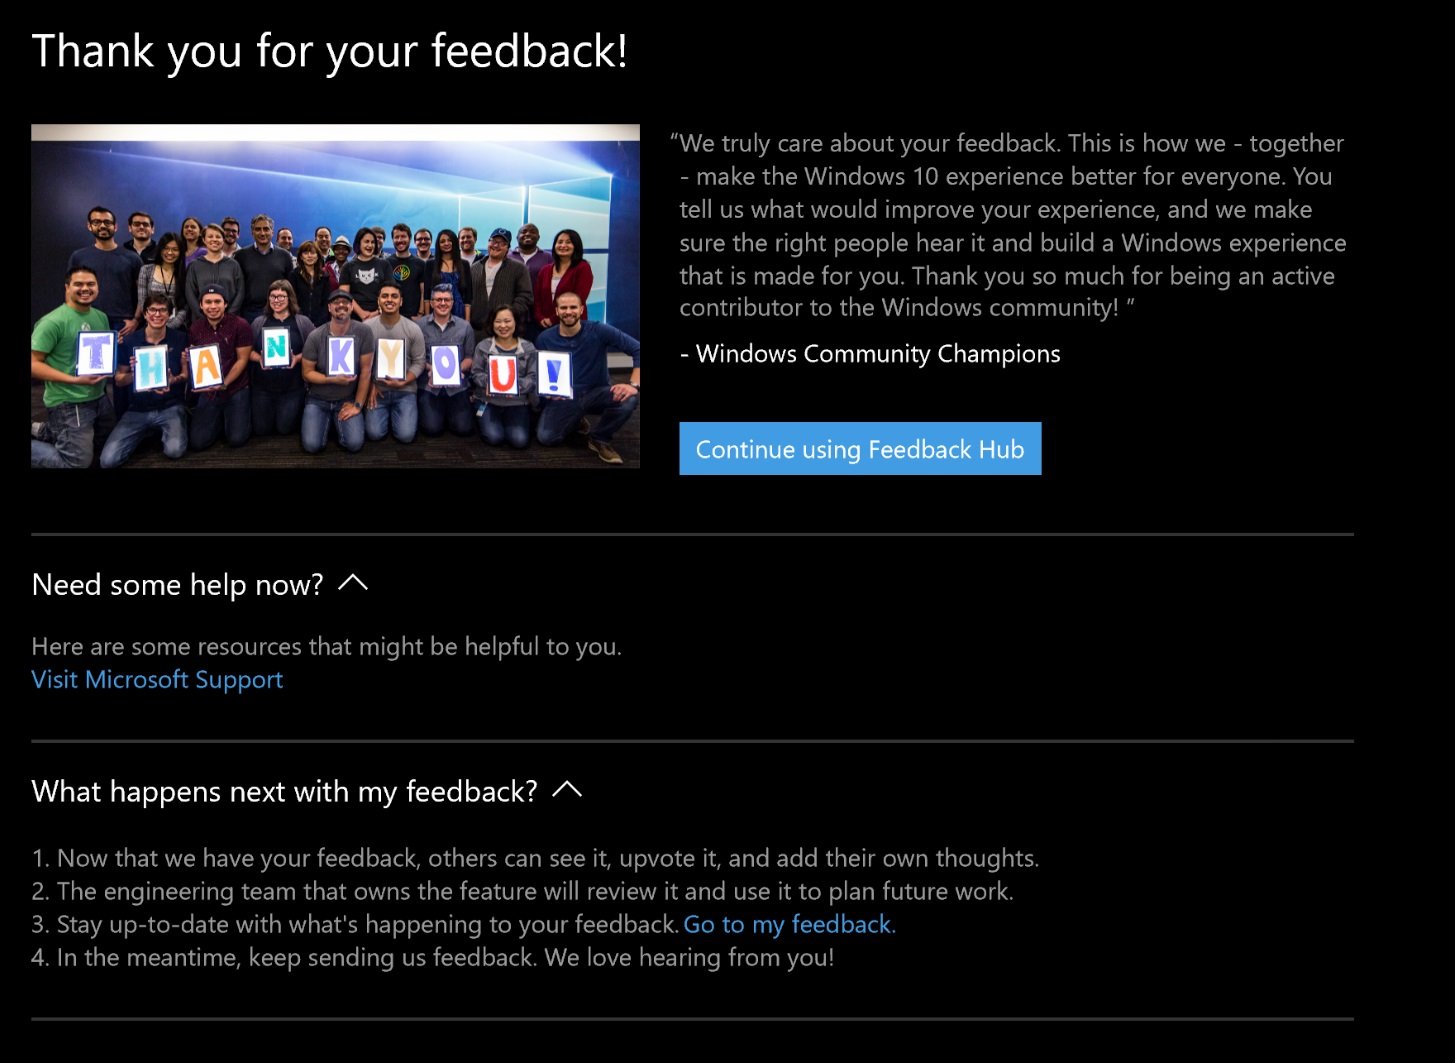 Microsoft updates the Feedback Hub with new features and improvements